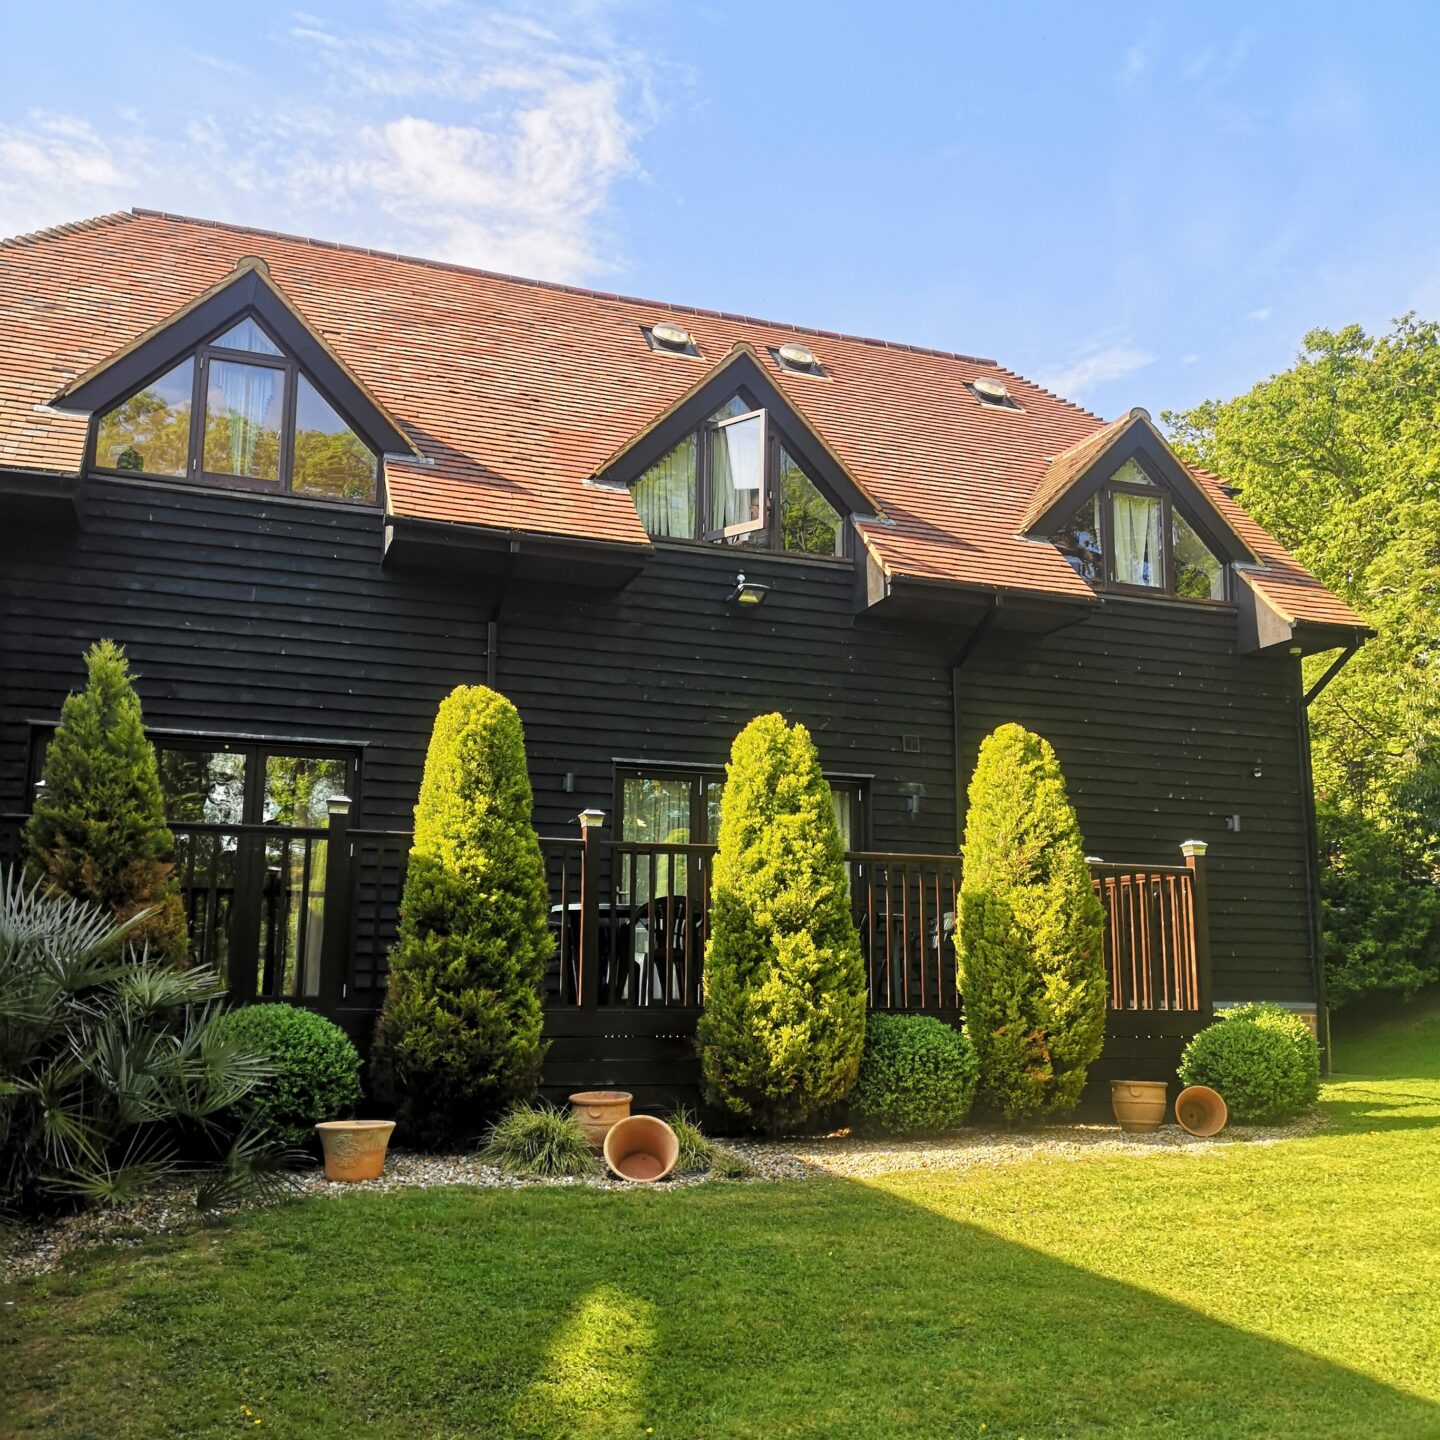 Honeywood Lodge, Bloom Stays, Kent Holiday, Holiday Homes, Cottages In Kent, Kent Life, Staycations, Holiday Accommodation Agency, Visit Kent, Canterbury, the Frenchie Mummy